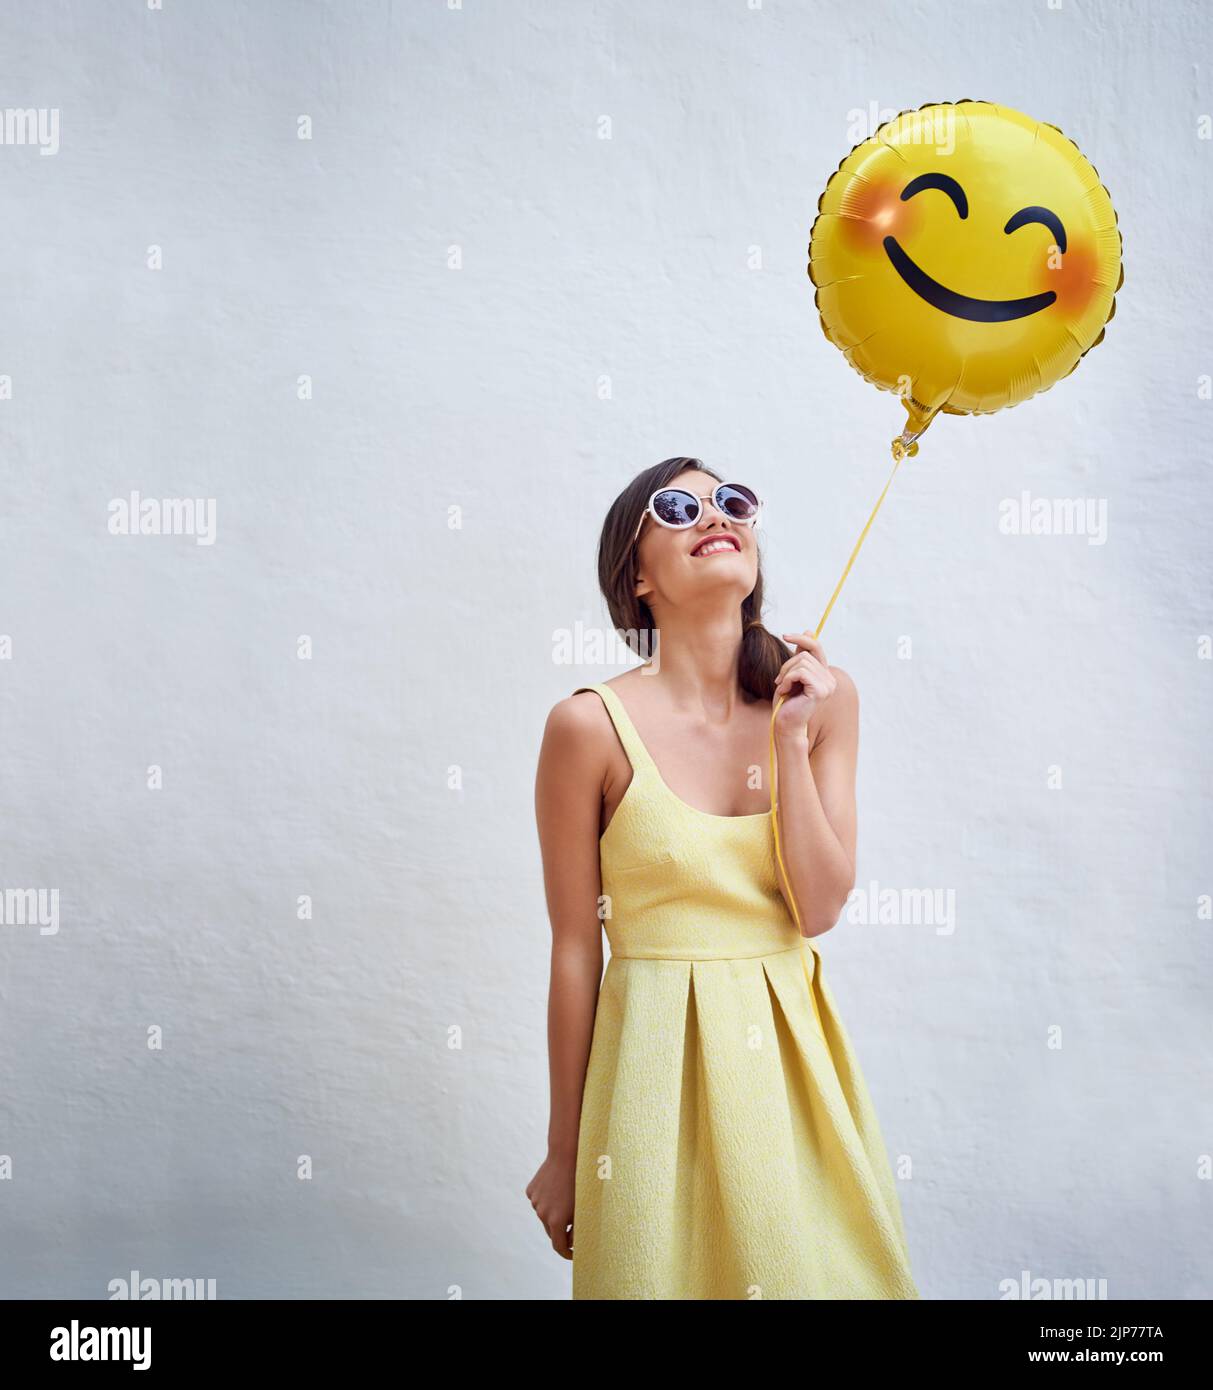 Stay happy. Studio shot of a cheerful young woman holding a smiling emoticon balloon while standing against a grey background. Stock Photo